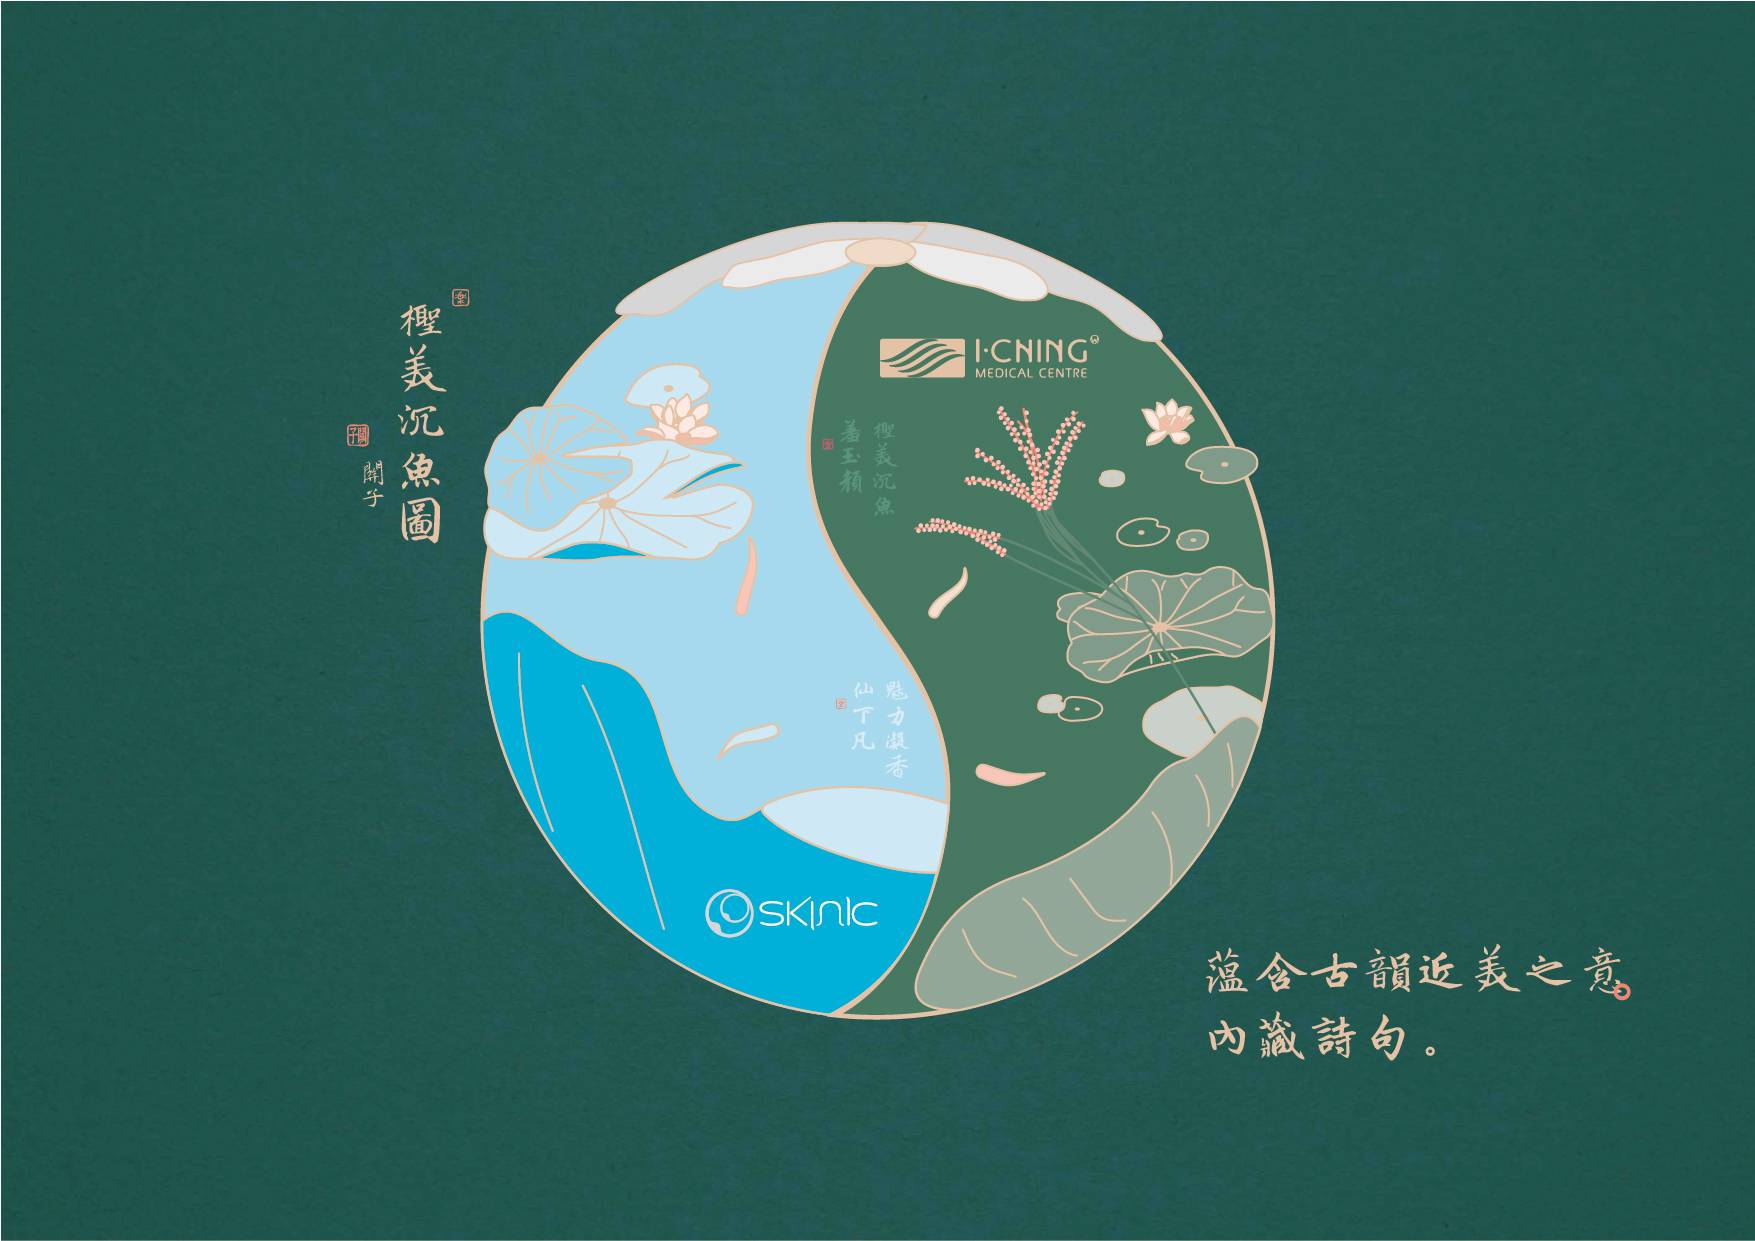 Skinic Beauty and iChing Medical for business card design showing the sinking fish and geese in the iChing Lake with poems